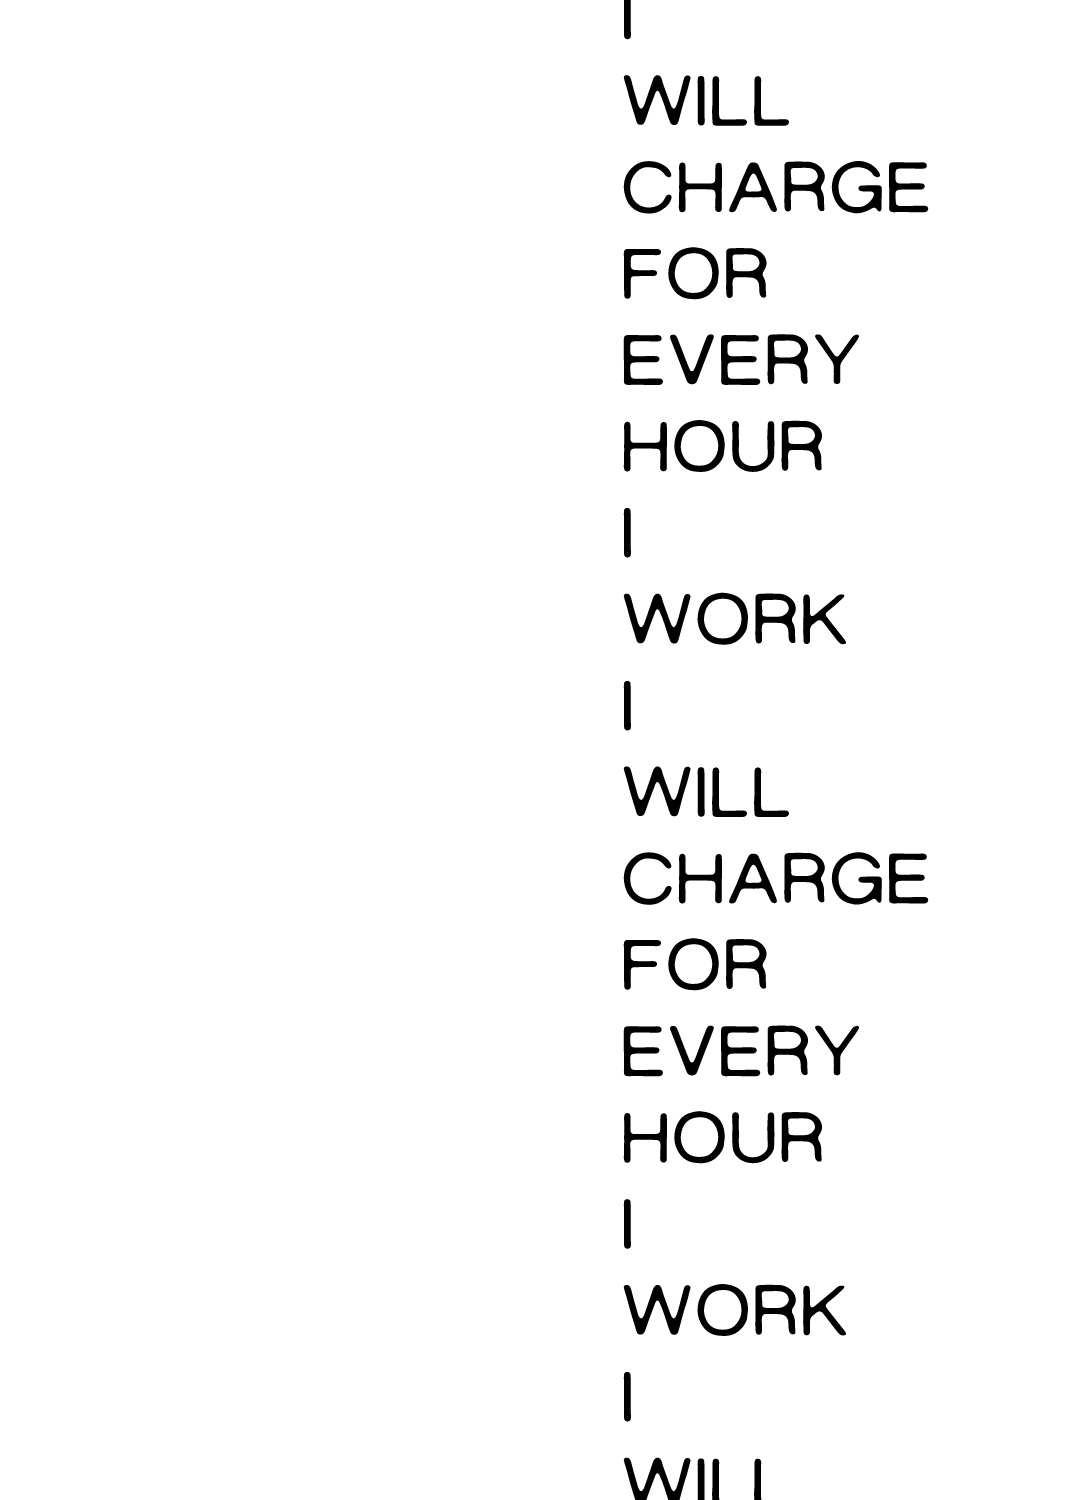 Graphics design that reads "I will charge for every hour I work"